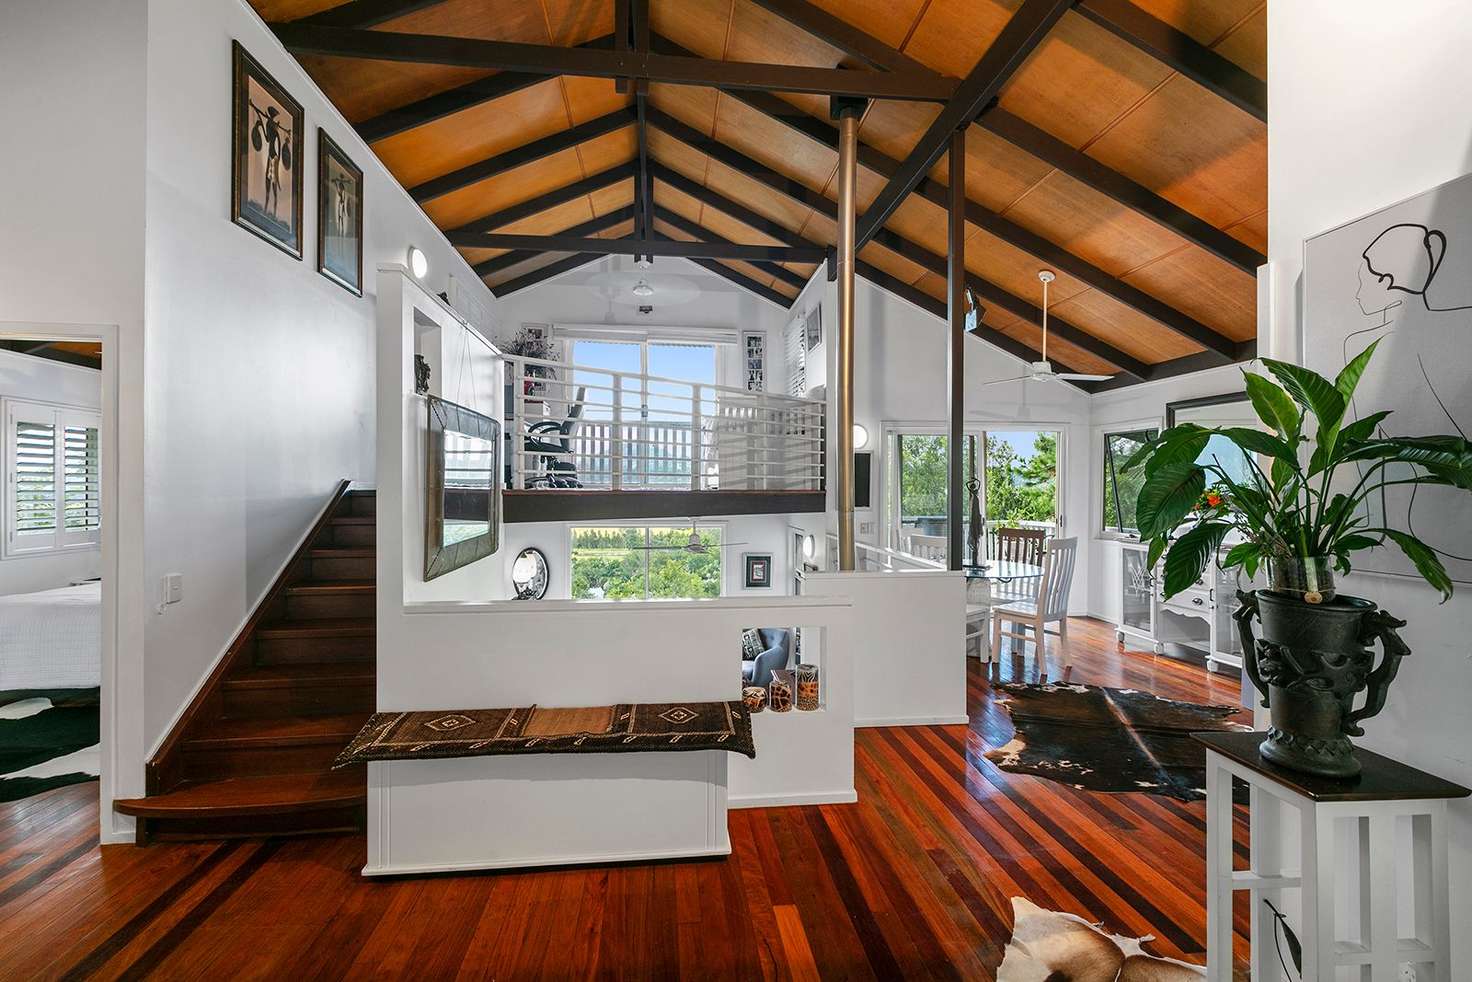 Main view of Homely house listing, 121D Memorial Drive, Eumundi QLD 4562